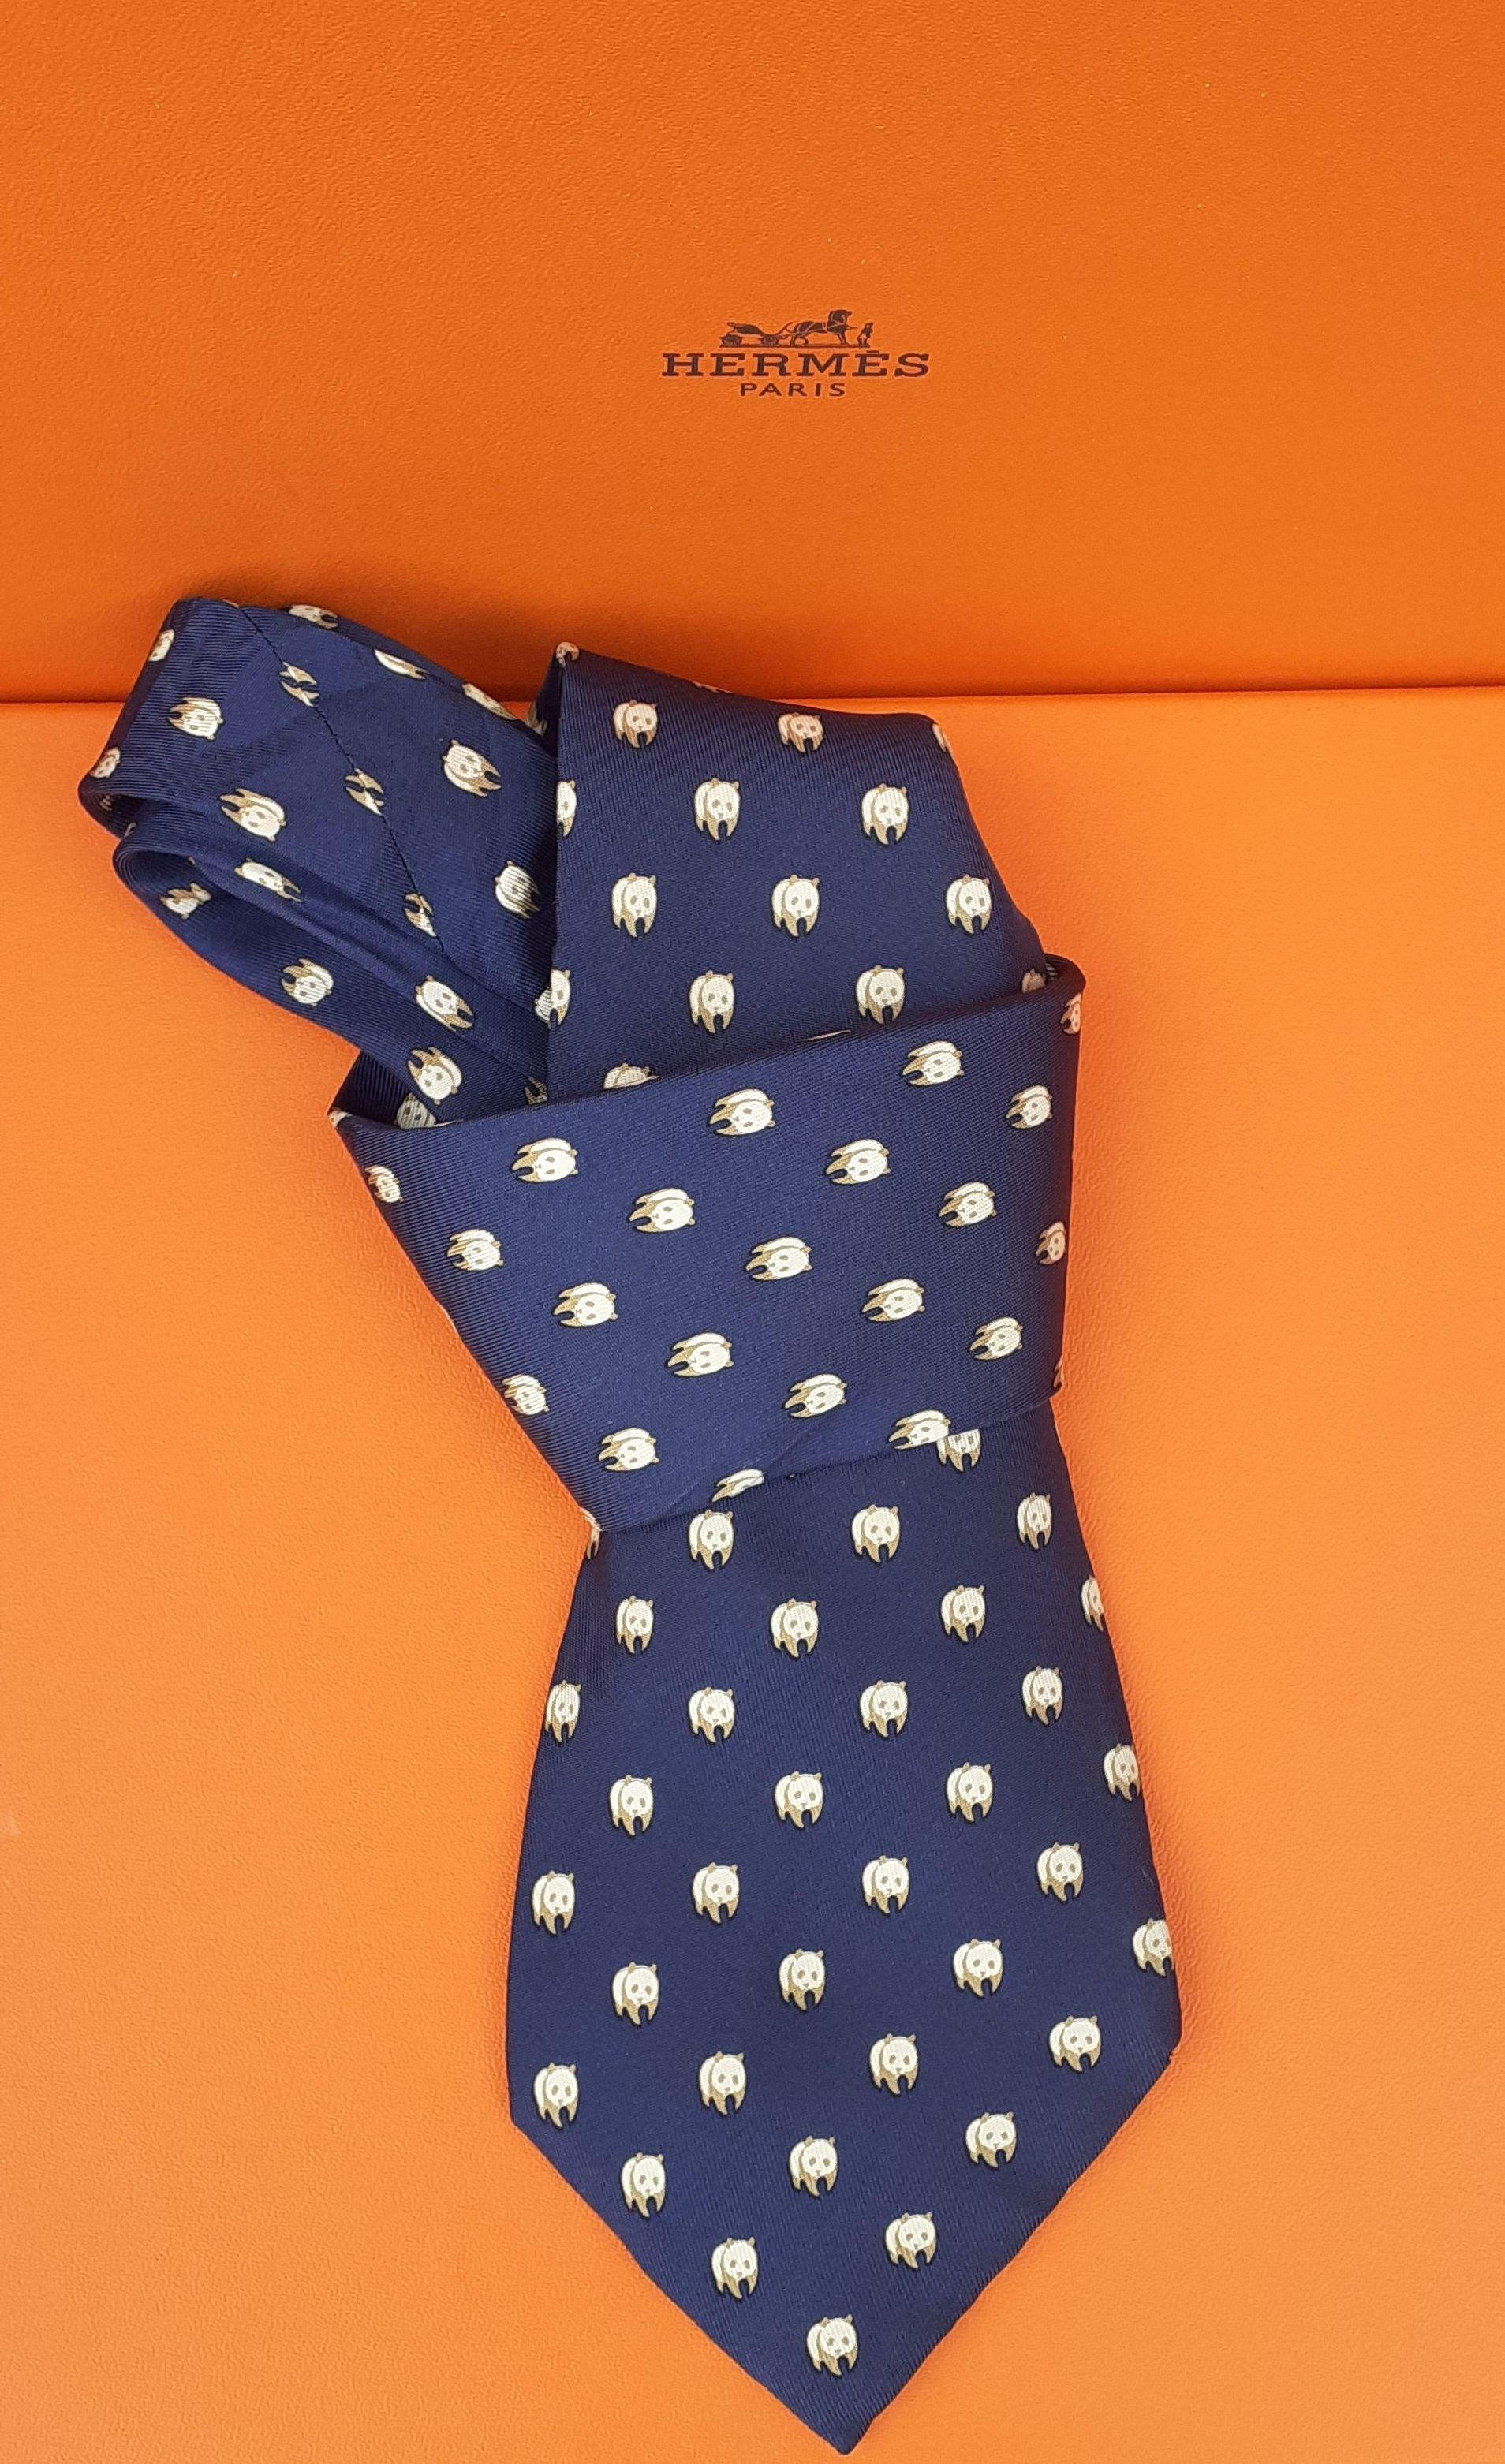 Super Cute Authentic Hermès Tie

Print: Pandas

Made in France

100% Silk

Colorways: Navy Blue, Beige, Ivory

Lined with plain navy blue silk

